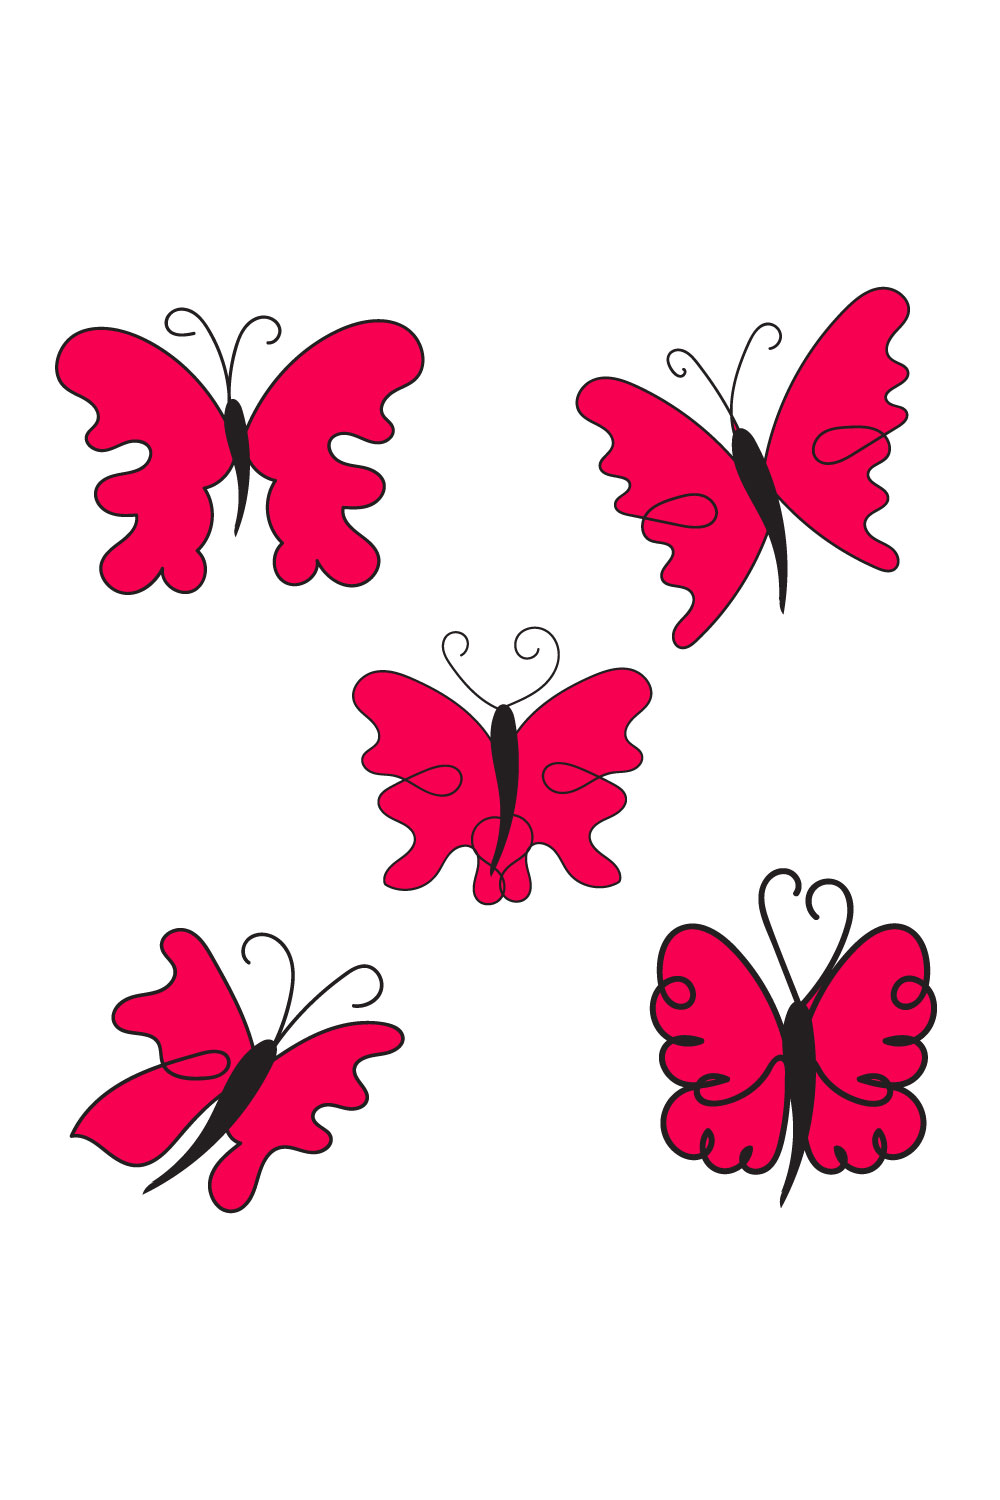 Group of four red butterflies flying through the air.